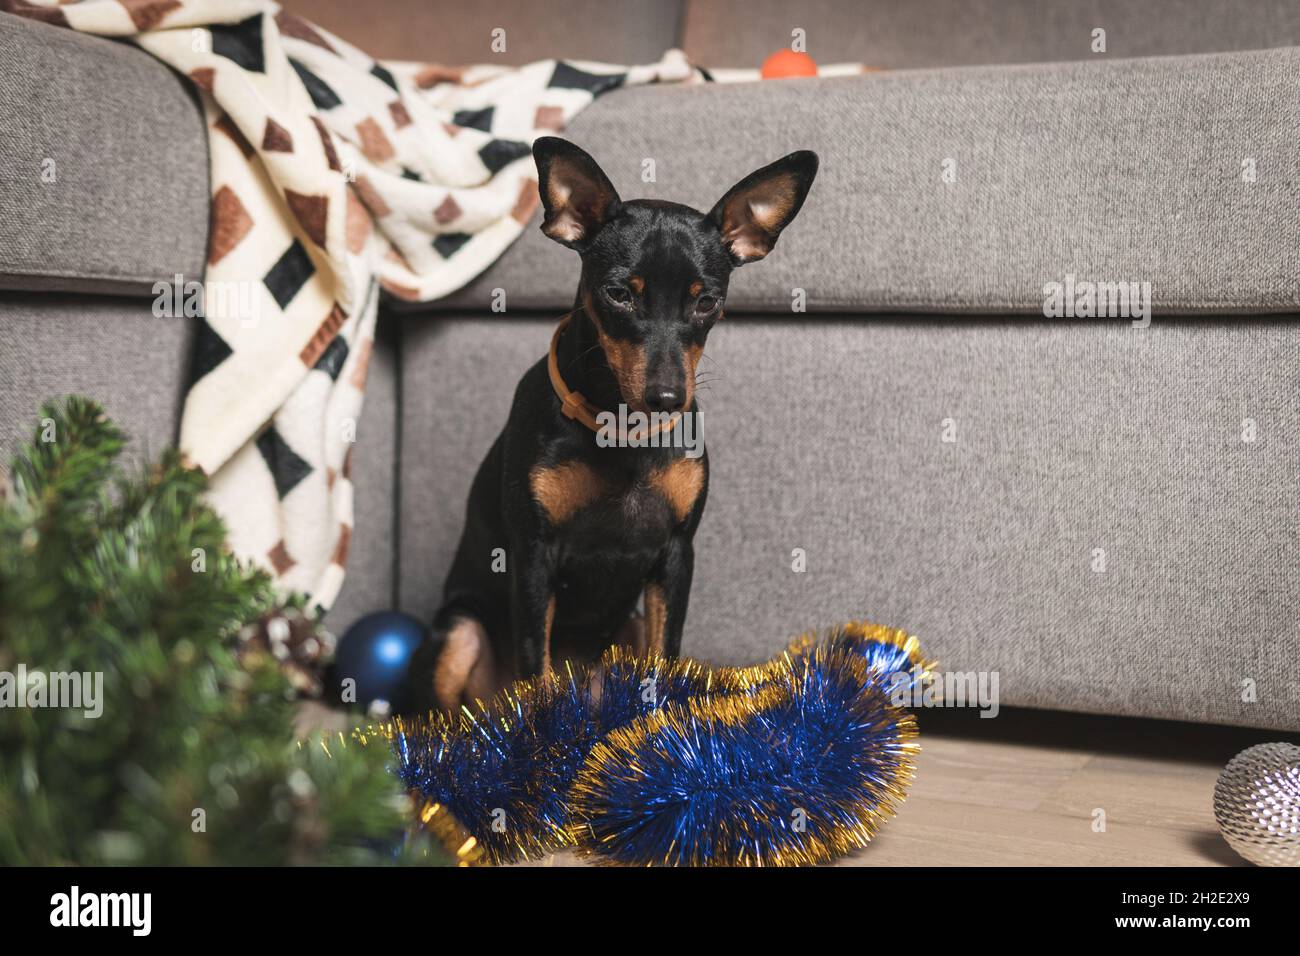 Funny dog miniature pinscher made a mess in the room and play with Christmas tree. Puppy at home alone. Lonely pets concept Stock Photo